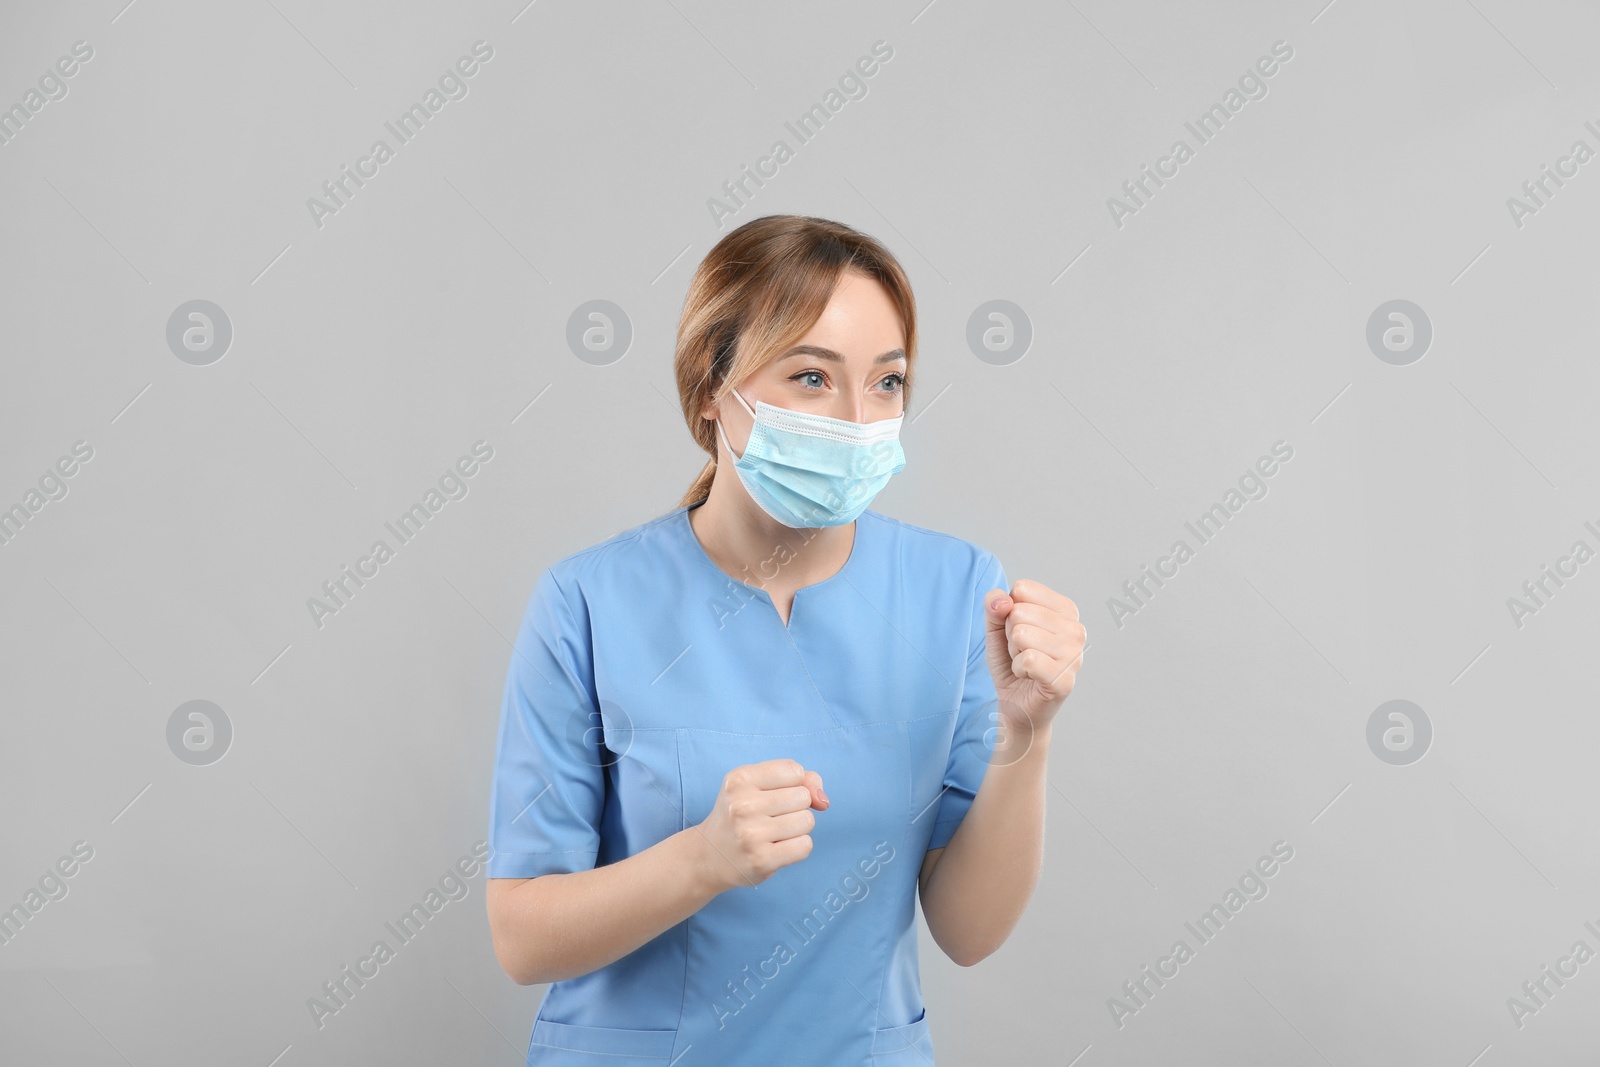 Photo of Doctor with protective mask in fighting pose on light grey background. Strong immunity concept